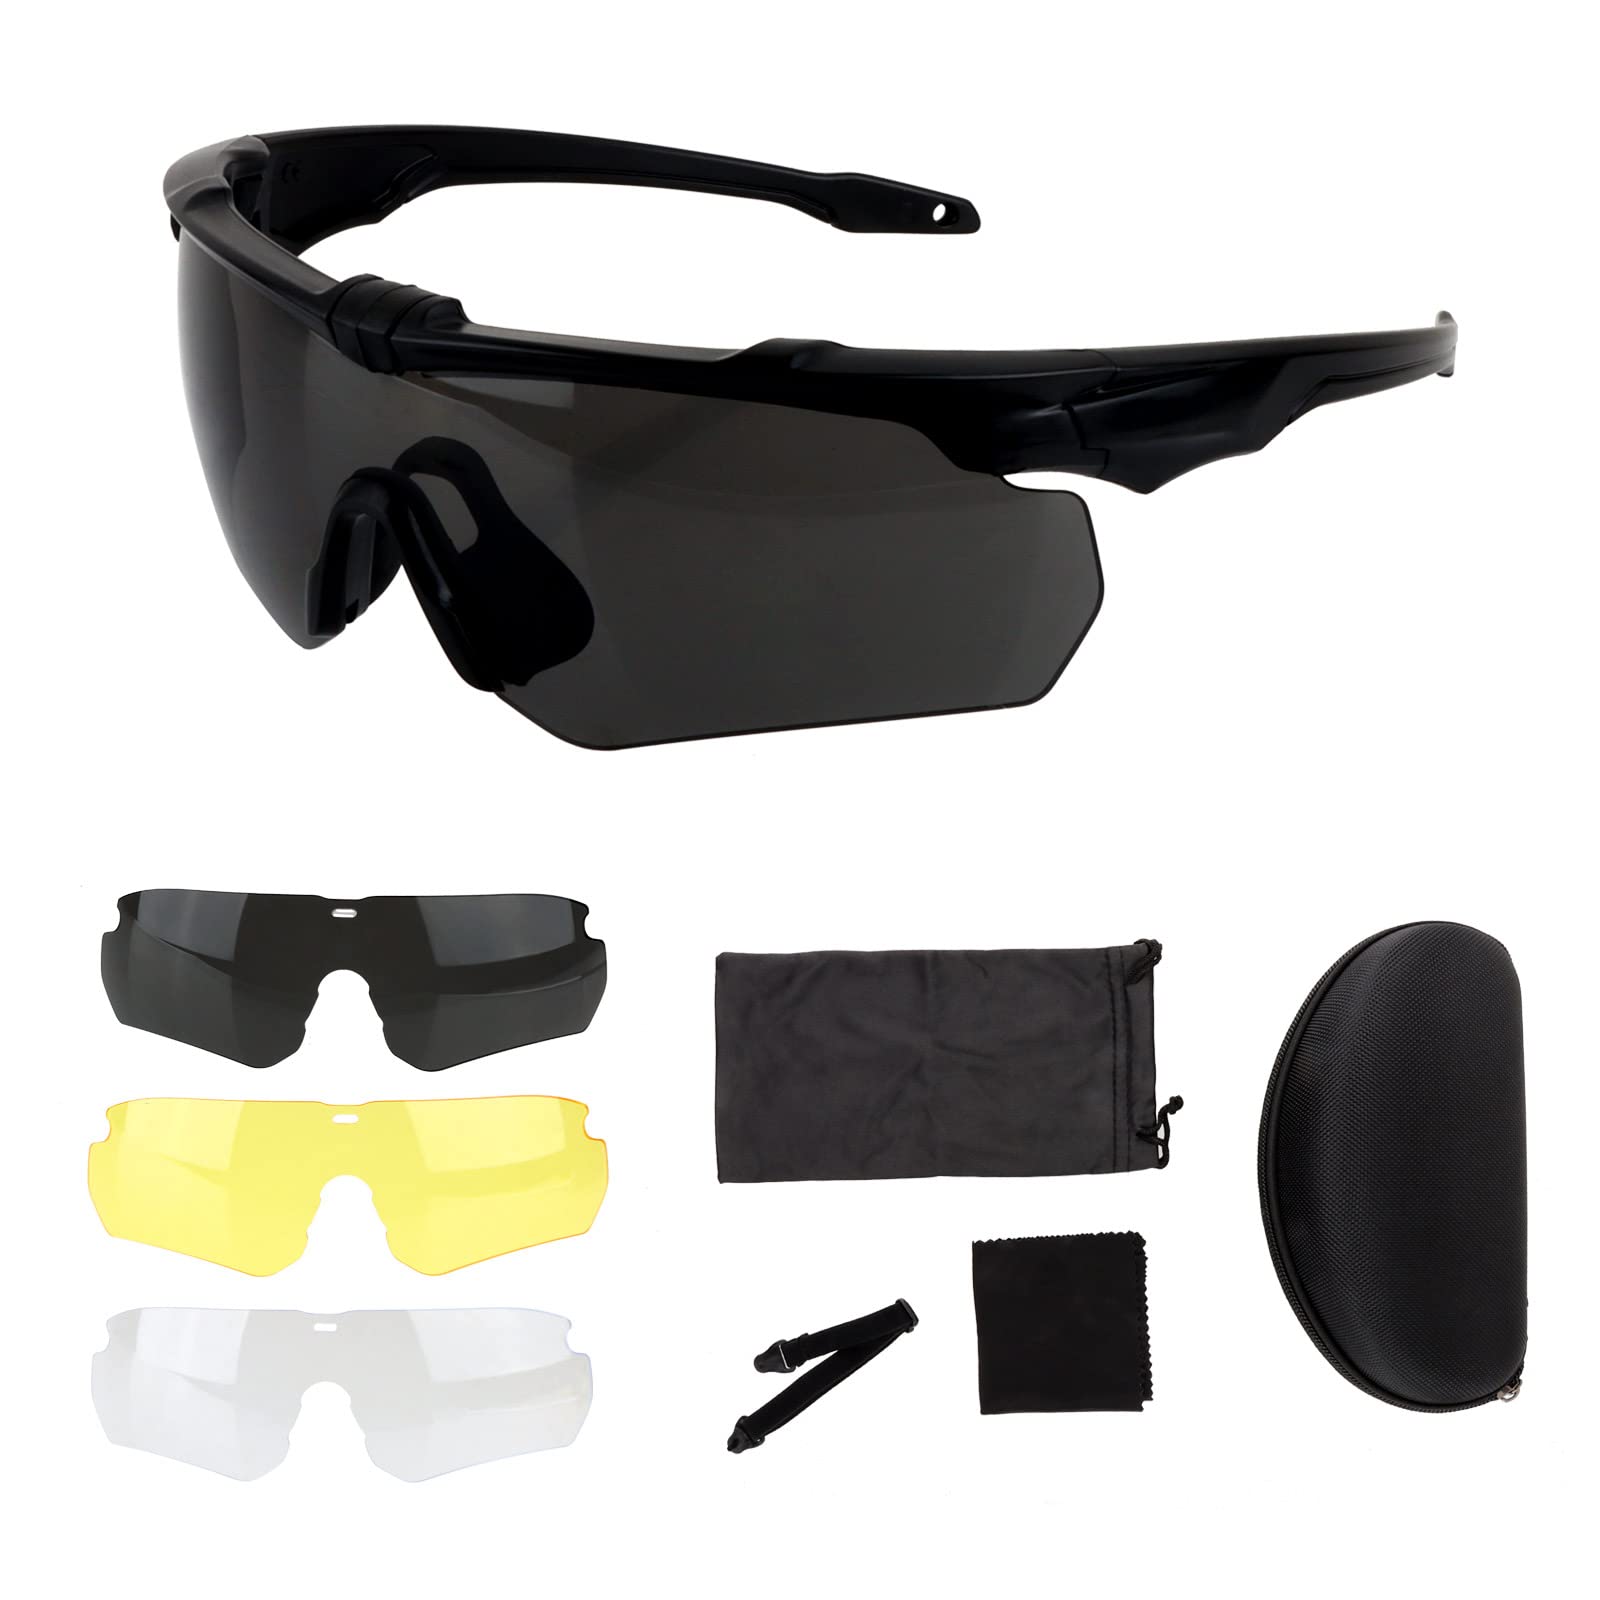 ToopMount Tactical Eyewear Anti Fog, Tactical Shooting Glasses with 3  Interchangeable Lens UV400 Protection Airsoft Goggle Black Frame